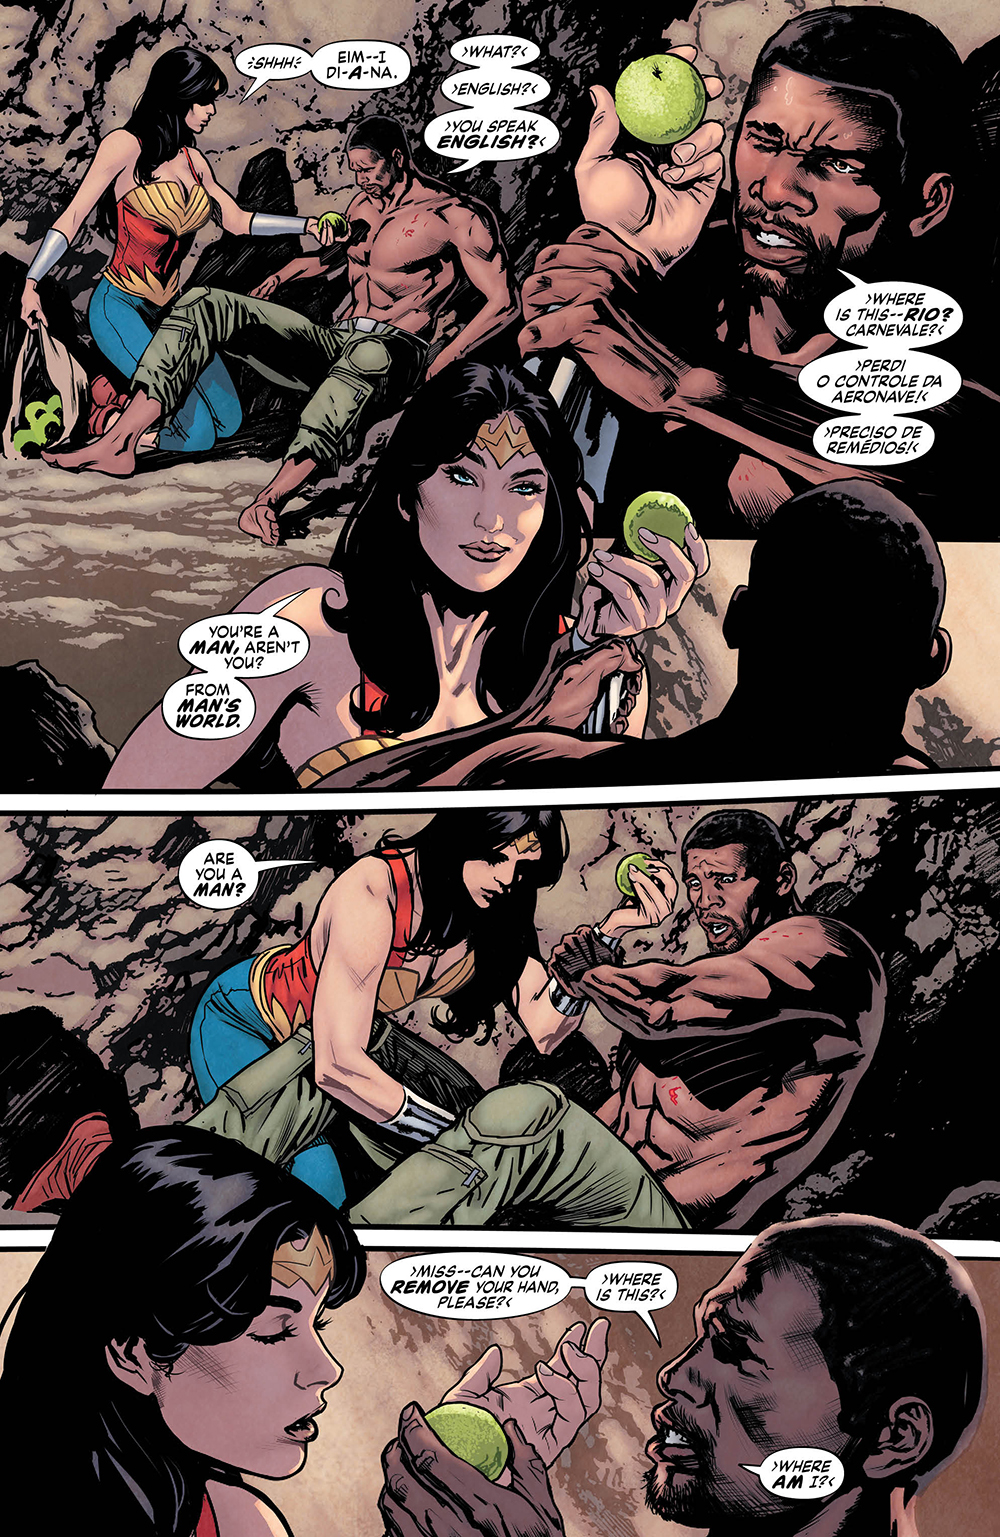 Wonder Woman Earth One By Grant Morrison And Yanick Paquette Review Comics Reviews